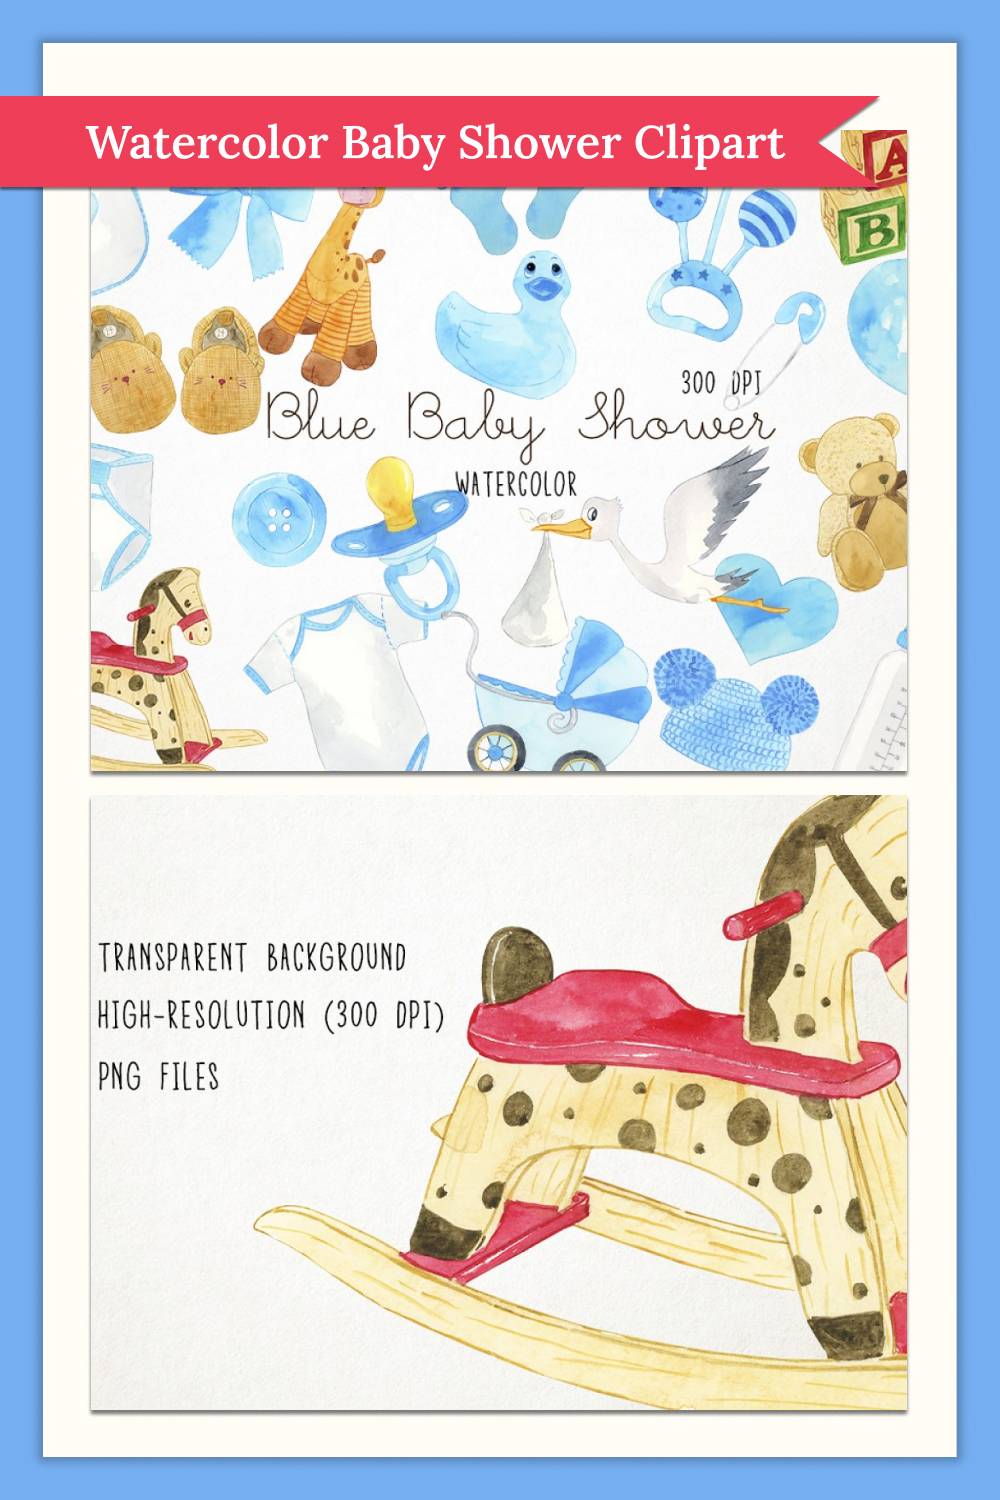 Watercolor baby shower clipart of pinterest.